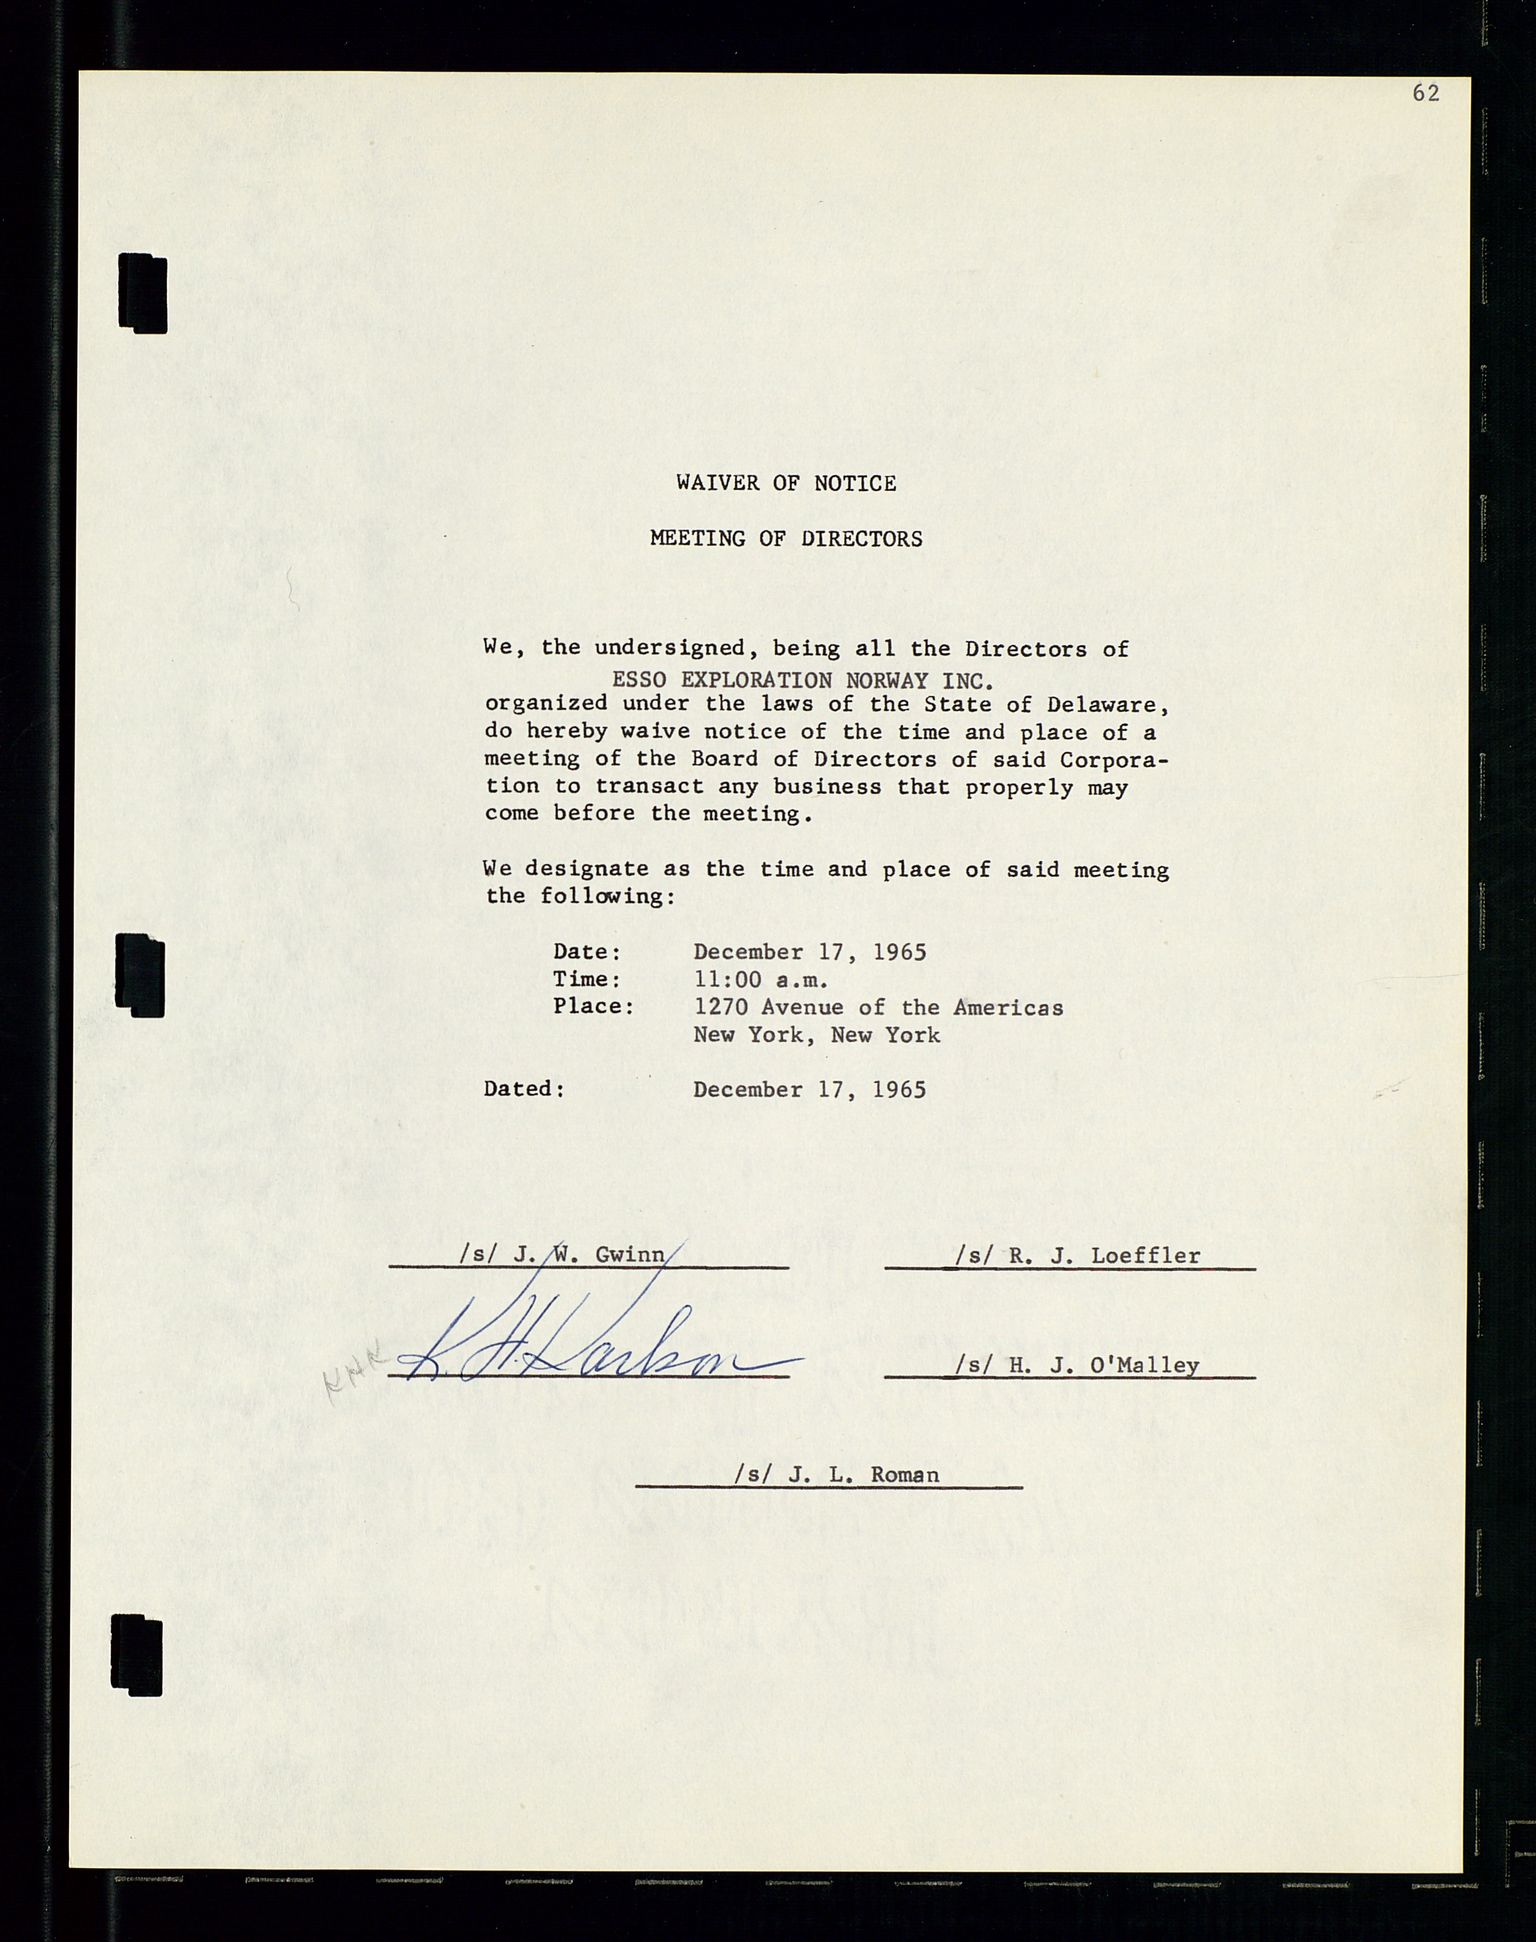 Pa 1512 - Esso Exploration and Production Norway Inc., SAST/A-101917/A/Aa/L0001/0001: Styredokumenter / Corporate records, By-Laws, Board meeting minutes, Incorporations, 1965-1975, p. 62